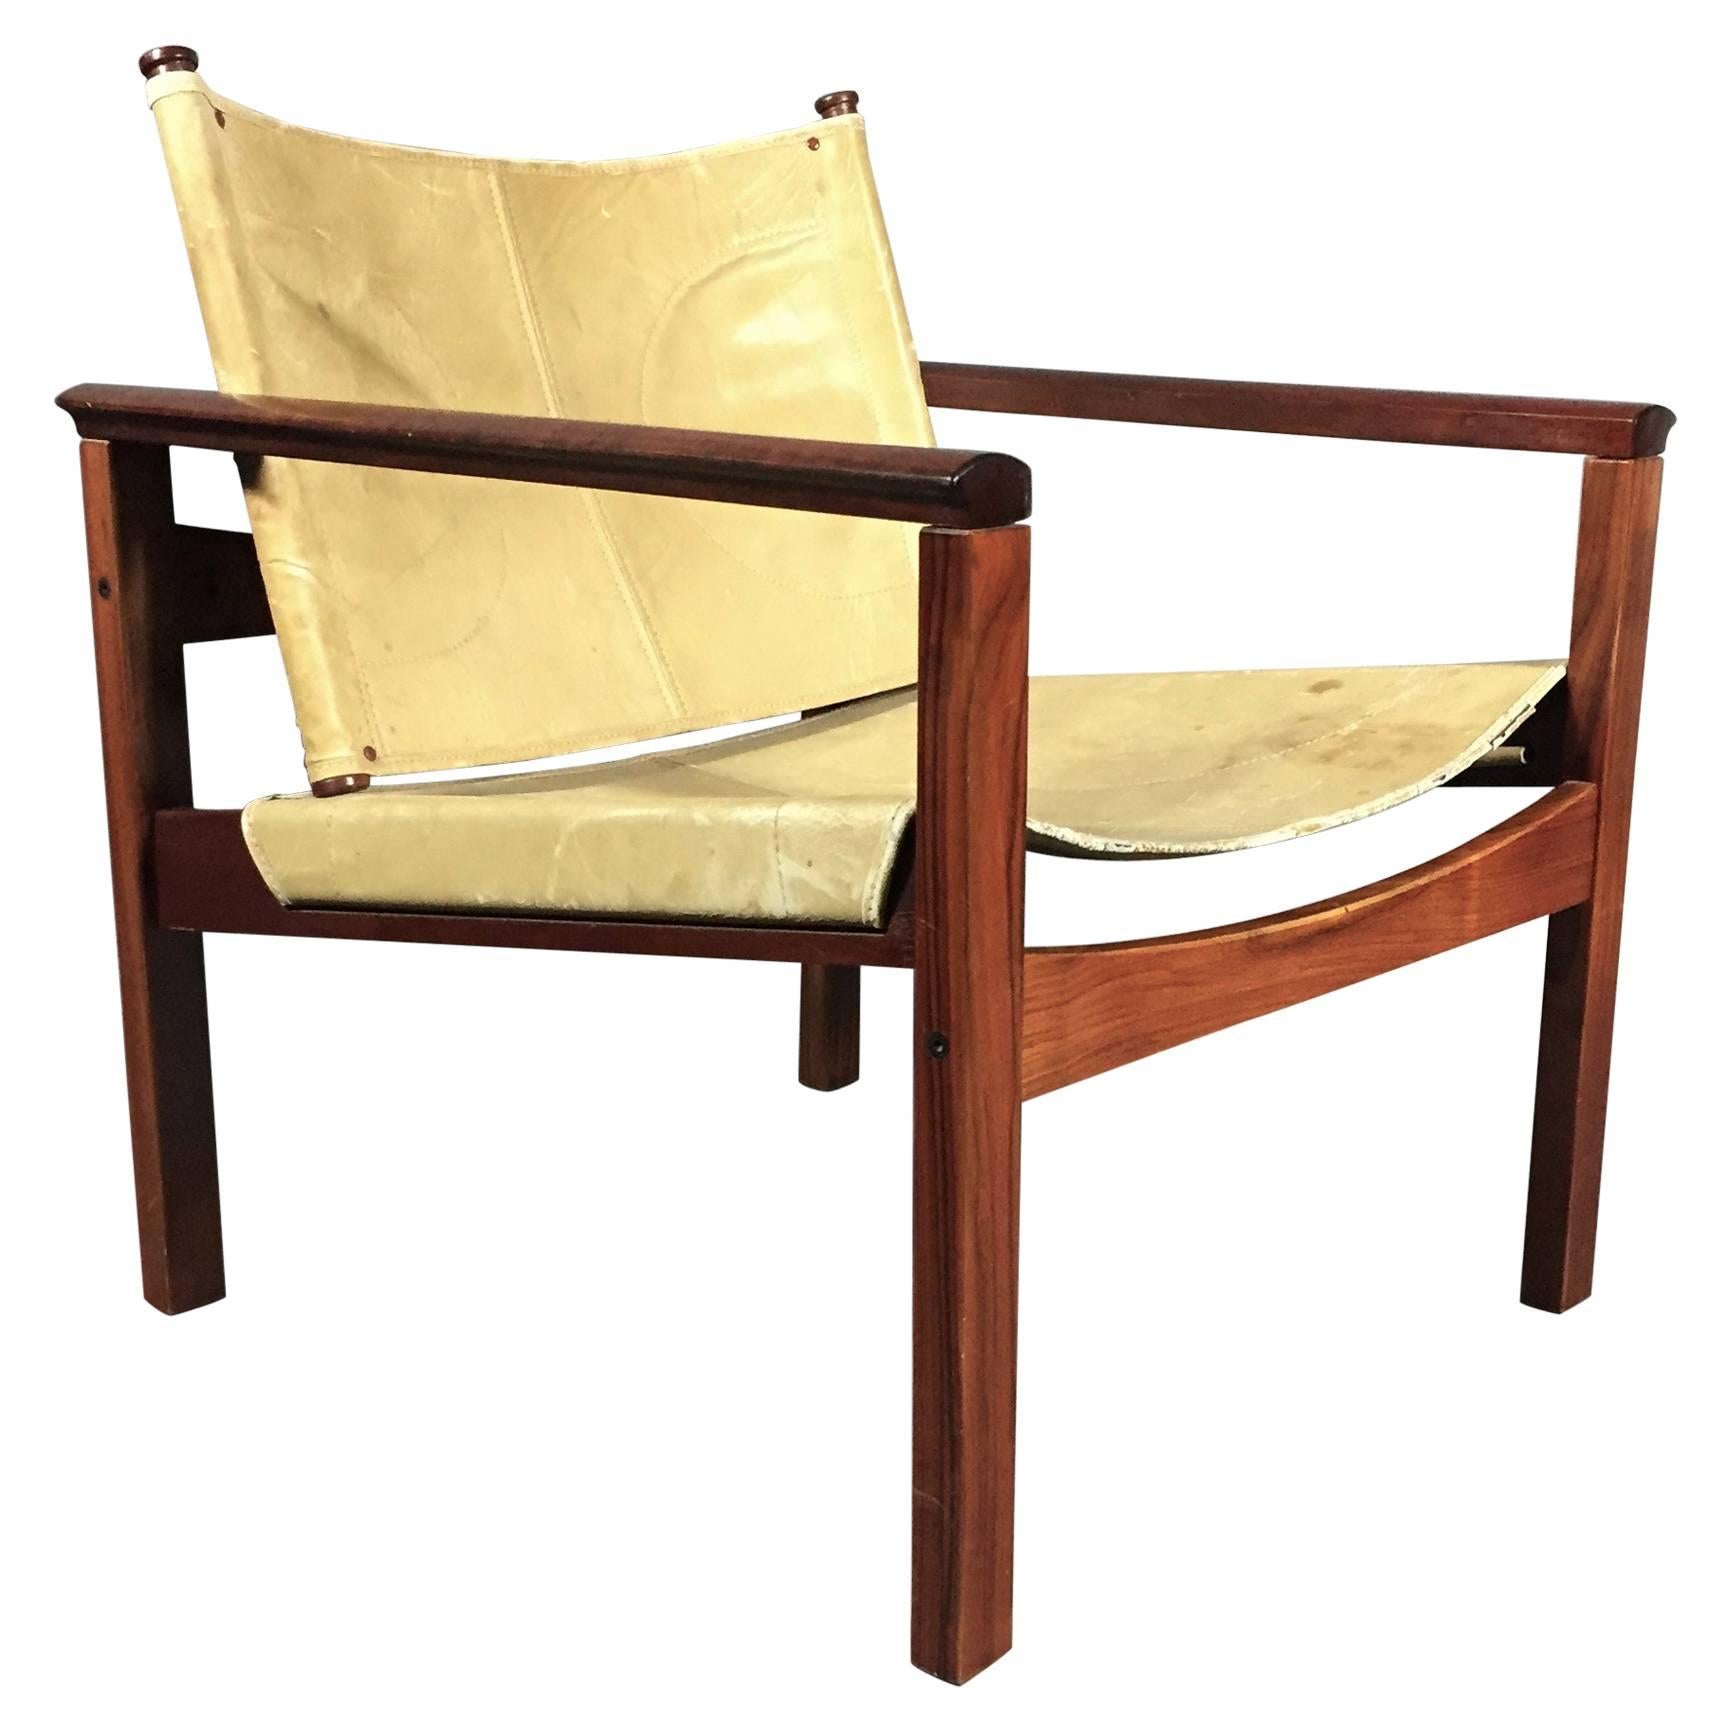 Michel Arnoult Rosewood and Leather "PegLev" Chair, Brazil 1968